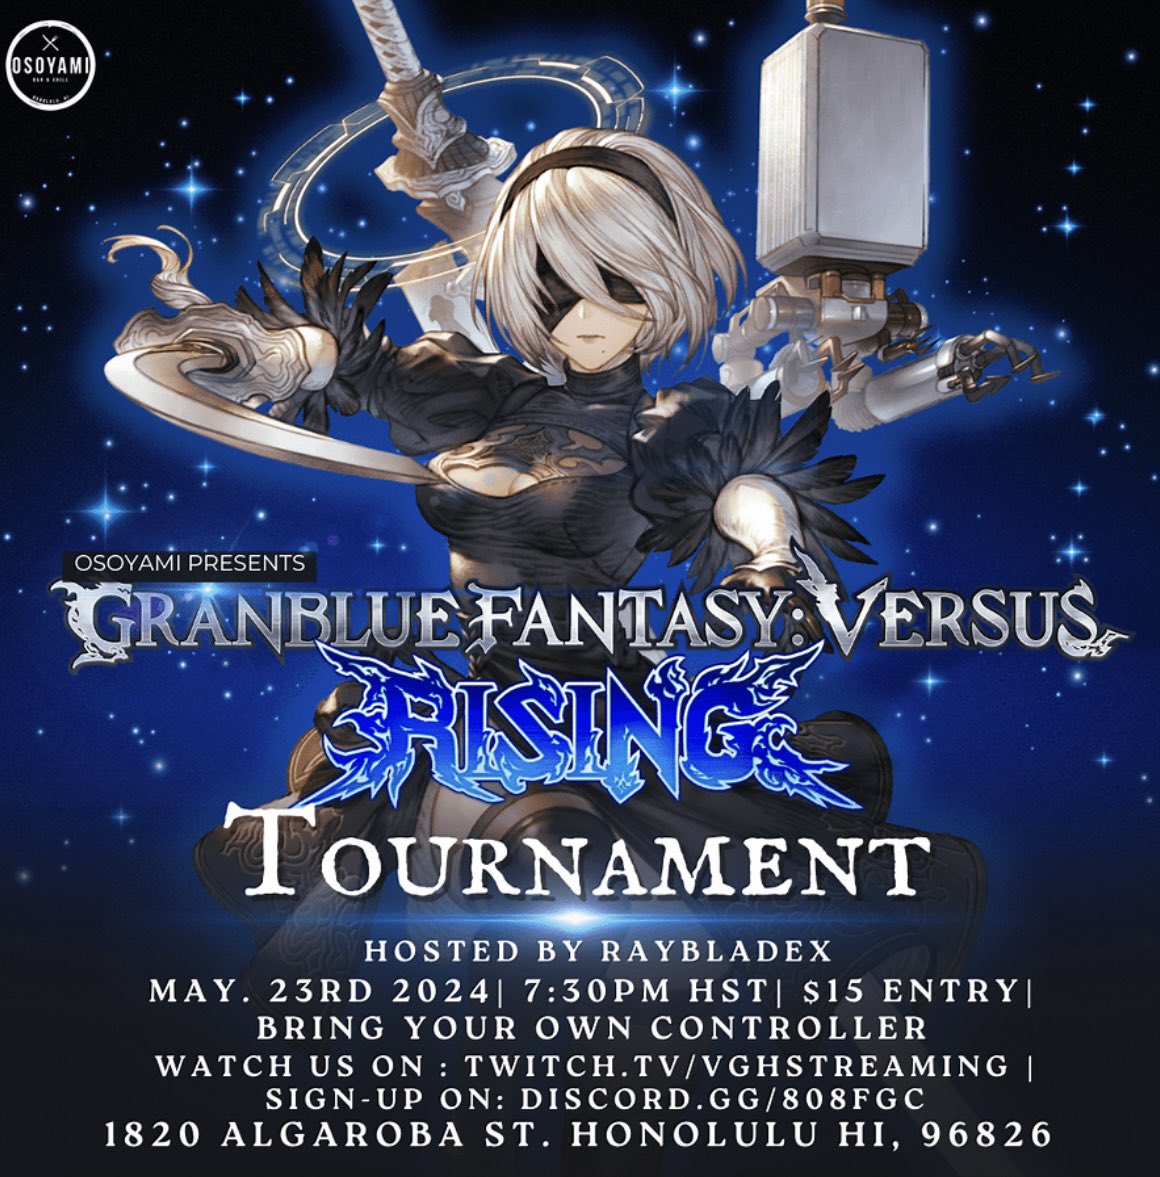 This Thursday, we’ll be holding a Granblue Fantasy Versus Rising tournament over at @osoyami808 - Casuals start at 6pm, with the tournament beginning at 7:30pm. #808fgc